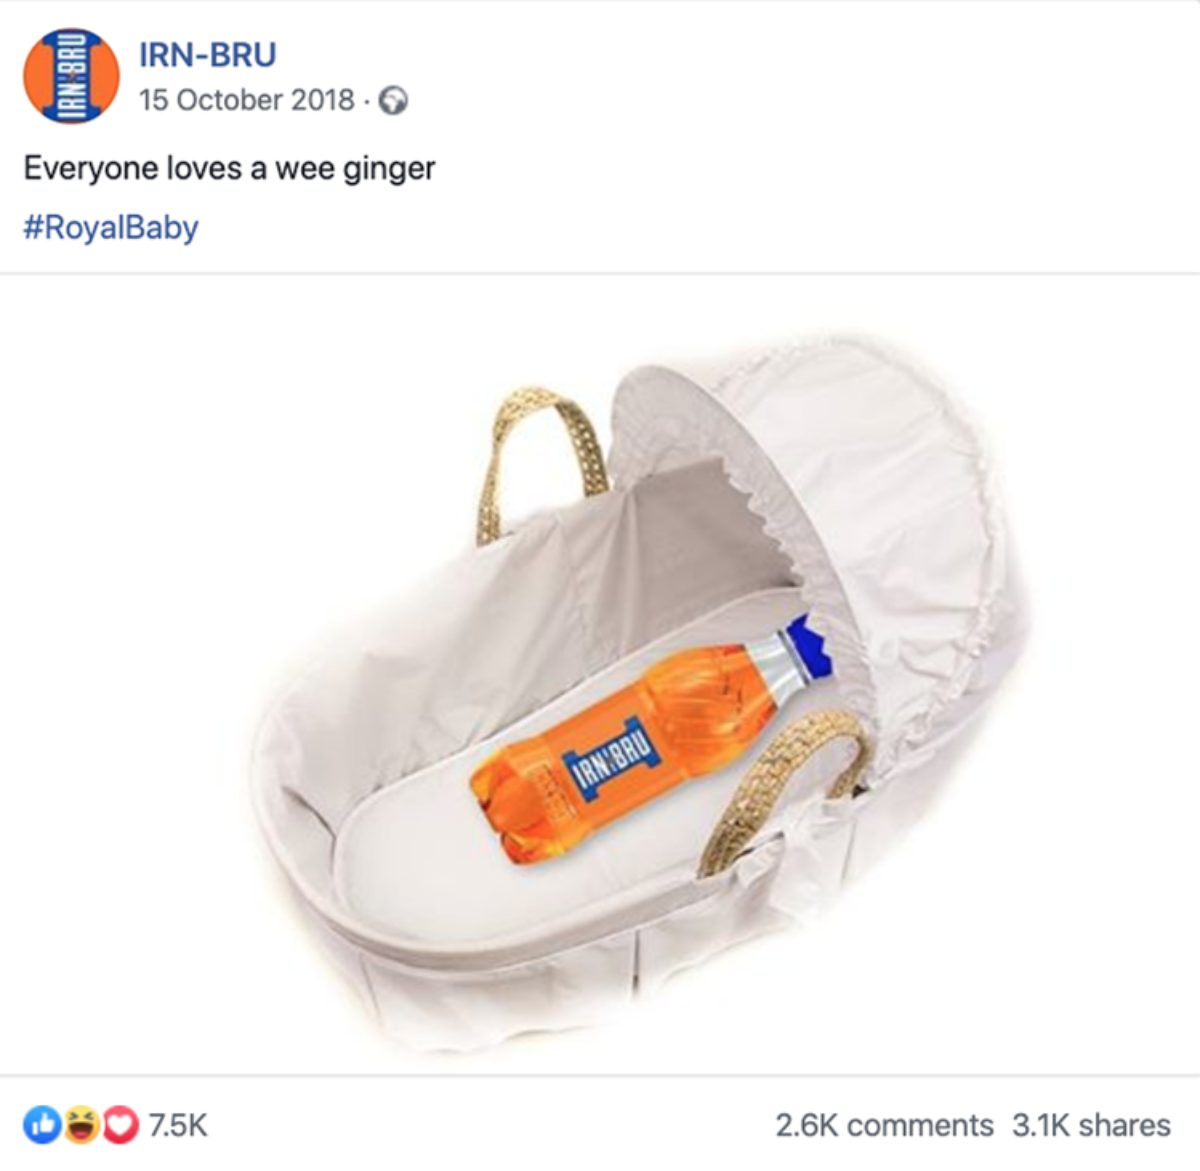 Everyone loves a wee ginger (A bottle of IRN-BRU in a pram)